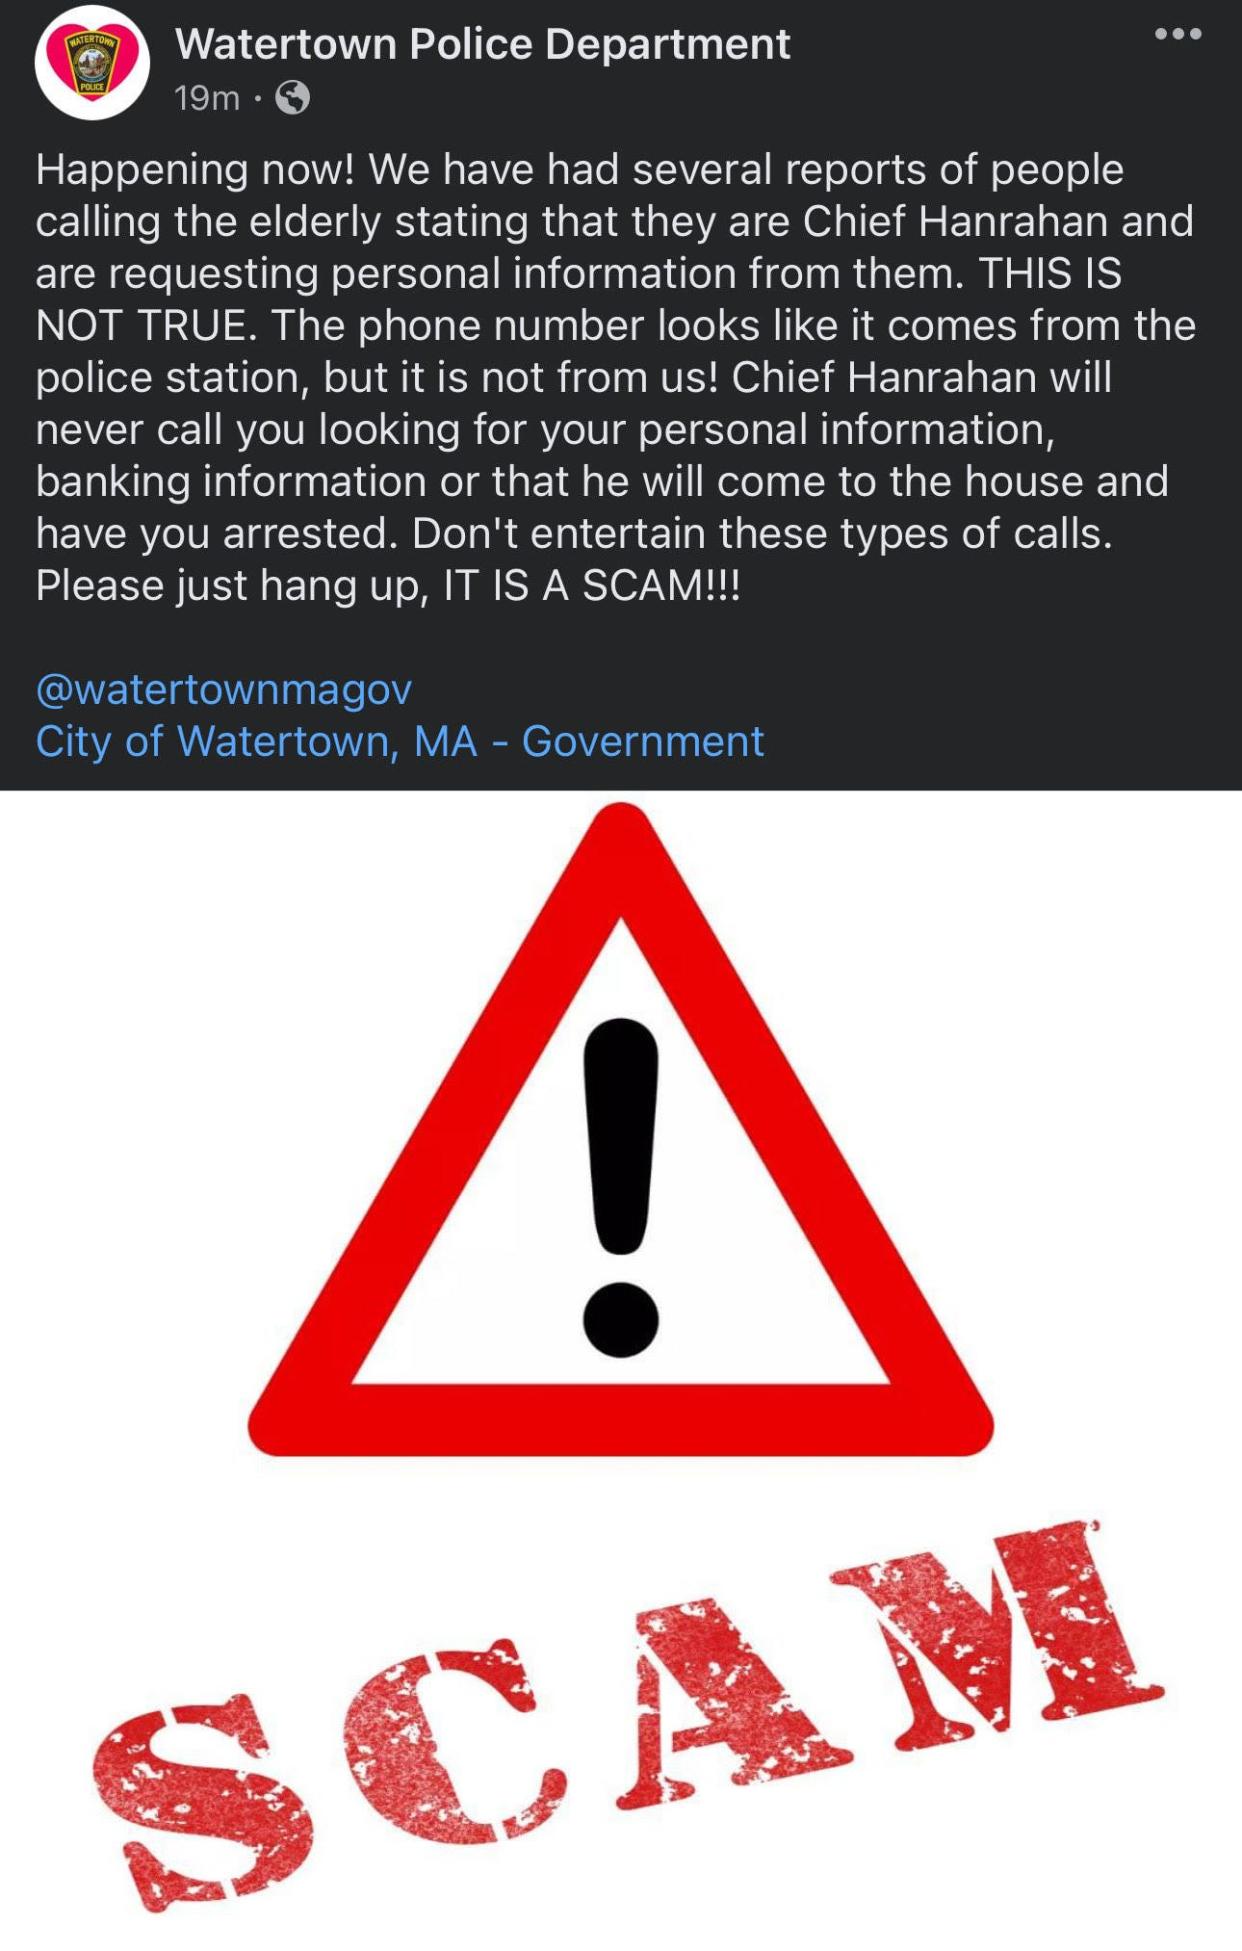 Watertown MA. residents were alerted to this scam last week by the city's police department.